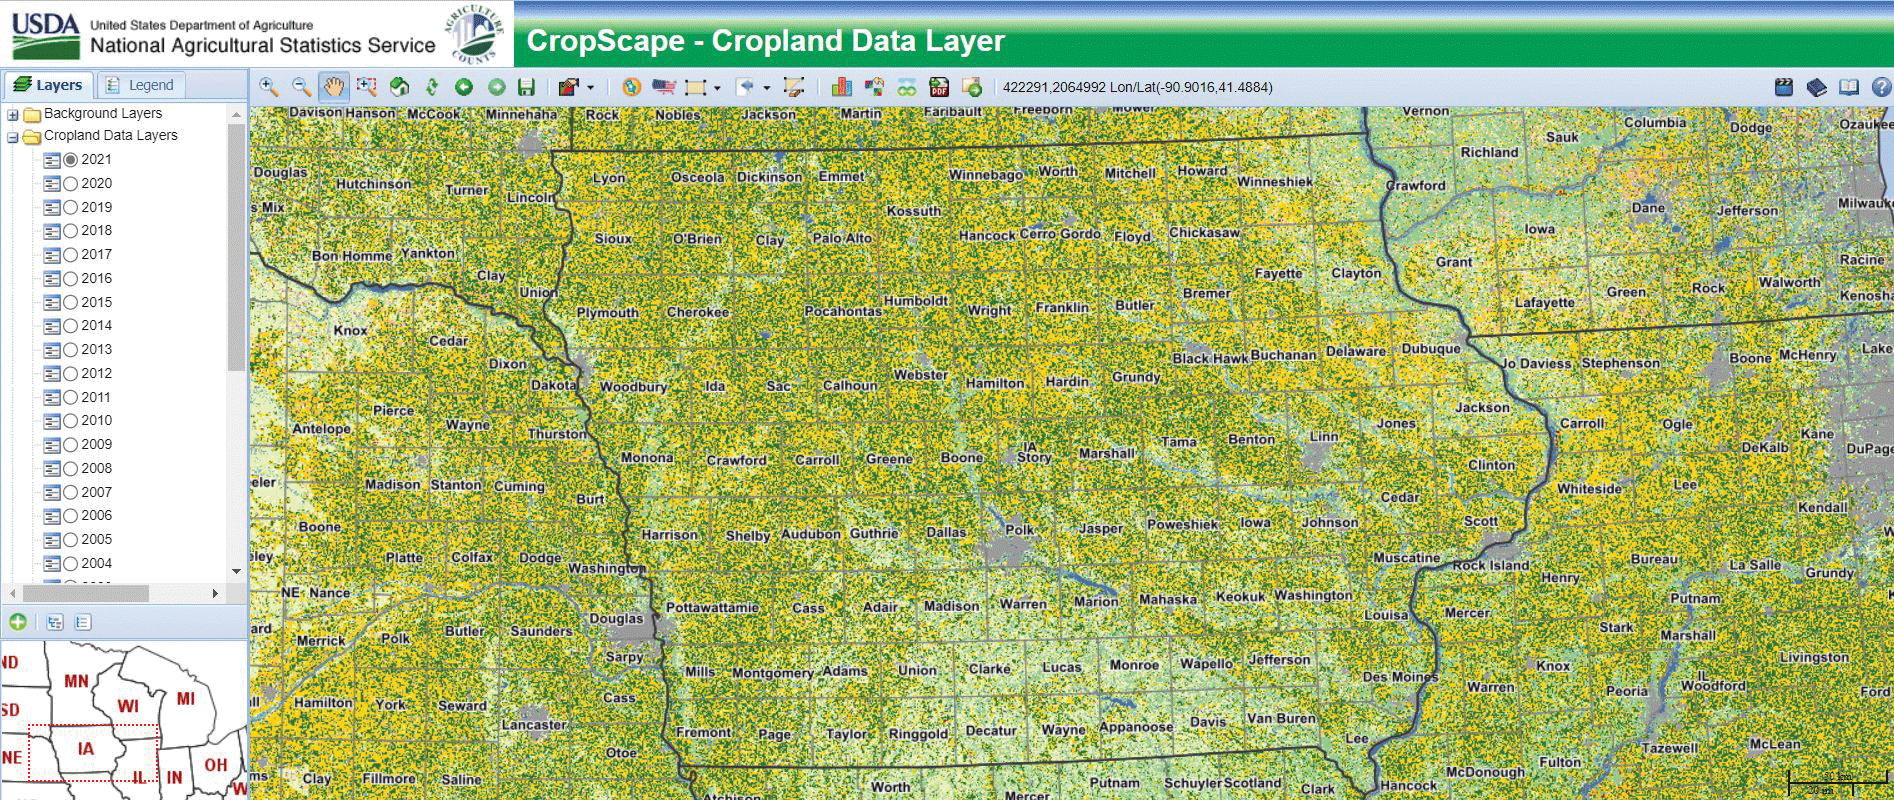 Screen capture showing corn and soybeans dominate Iowa's cropland.